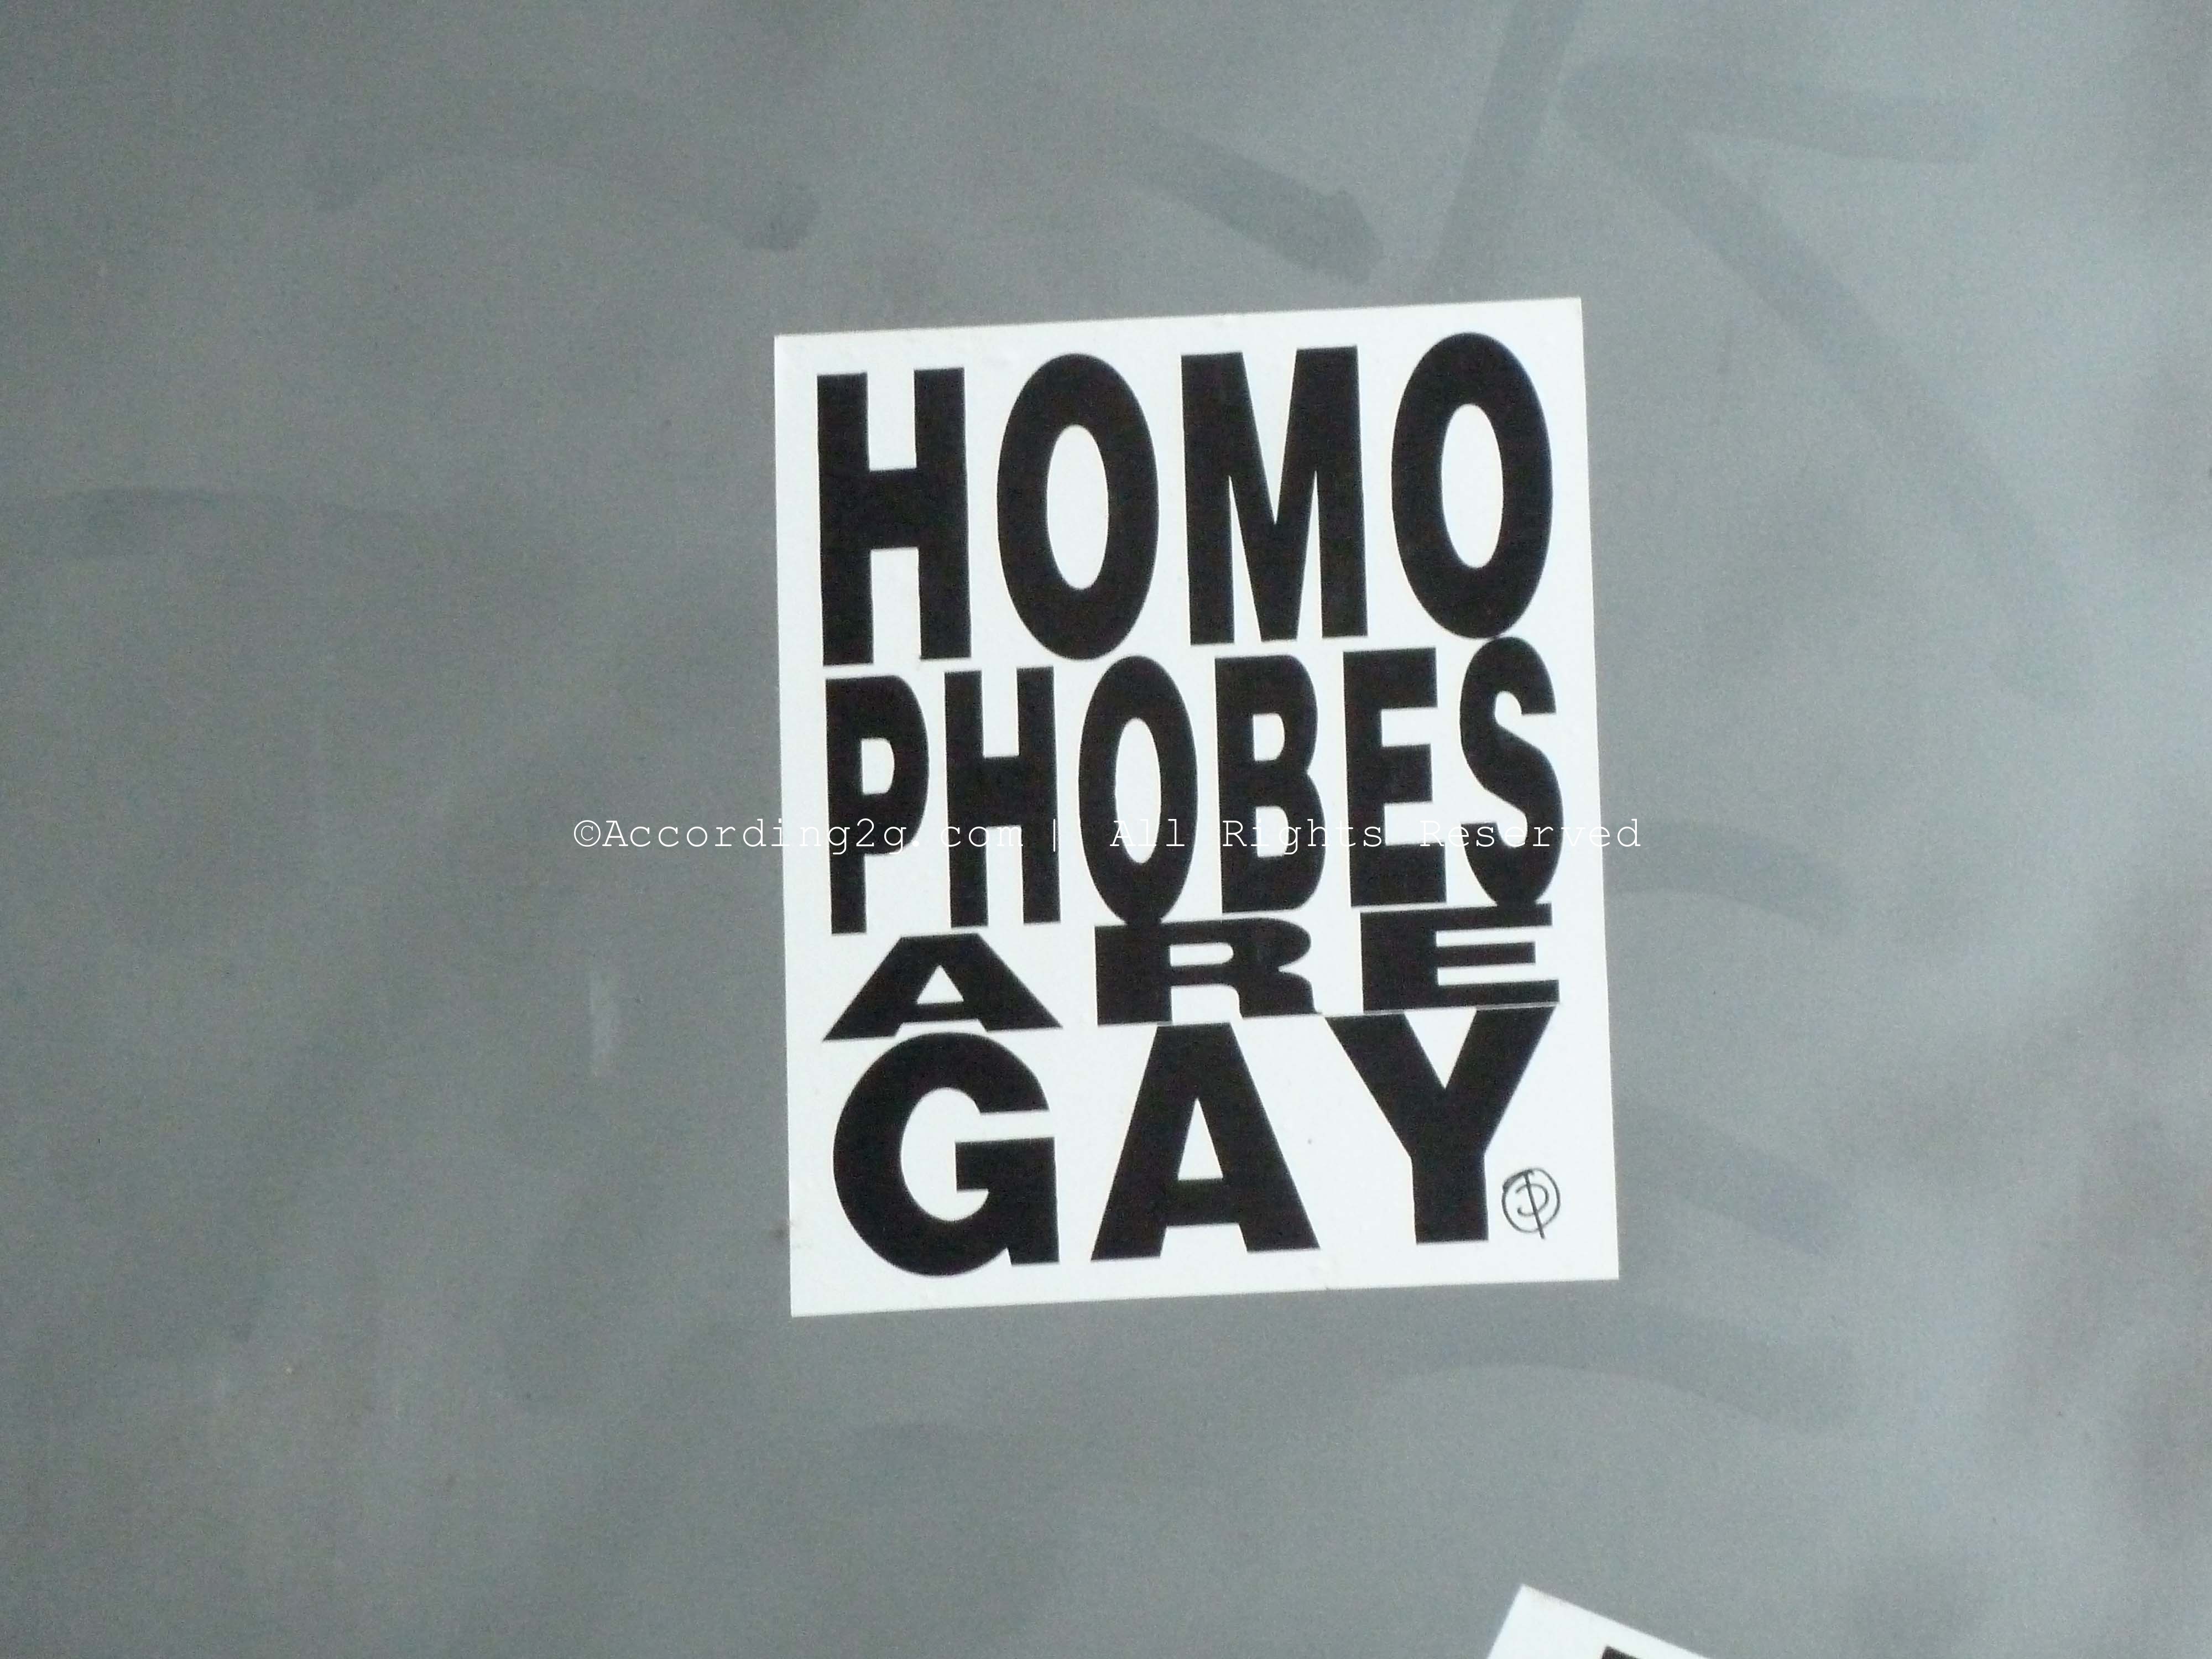 Homophobes are gay